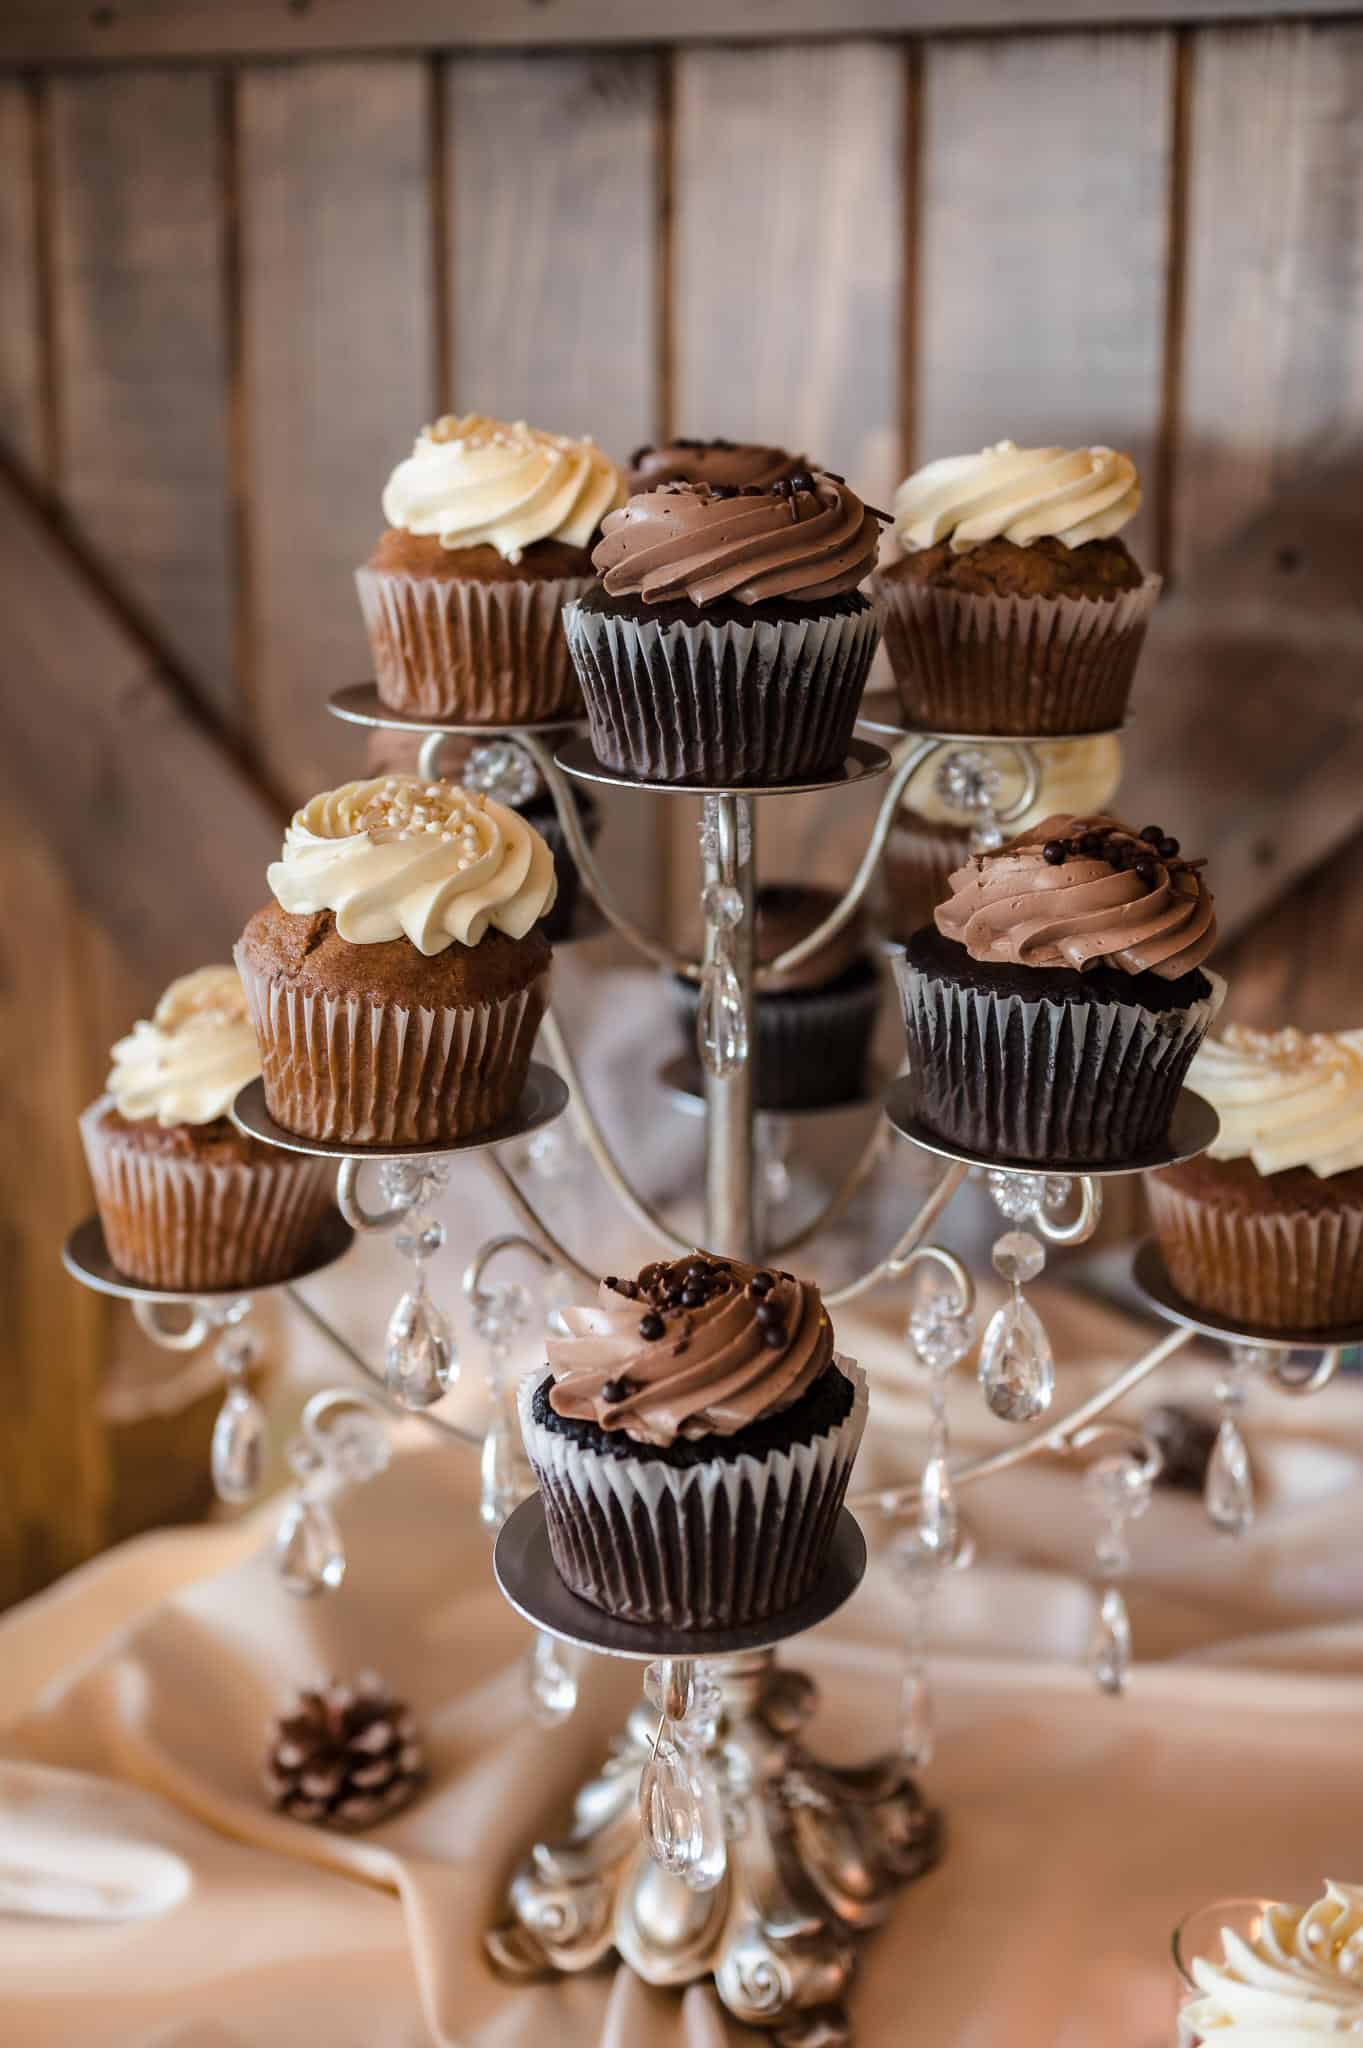 Close up of vanilla and chocolate frosted cupcakes at a wedding on the dessert table.